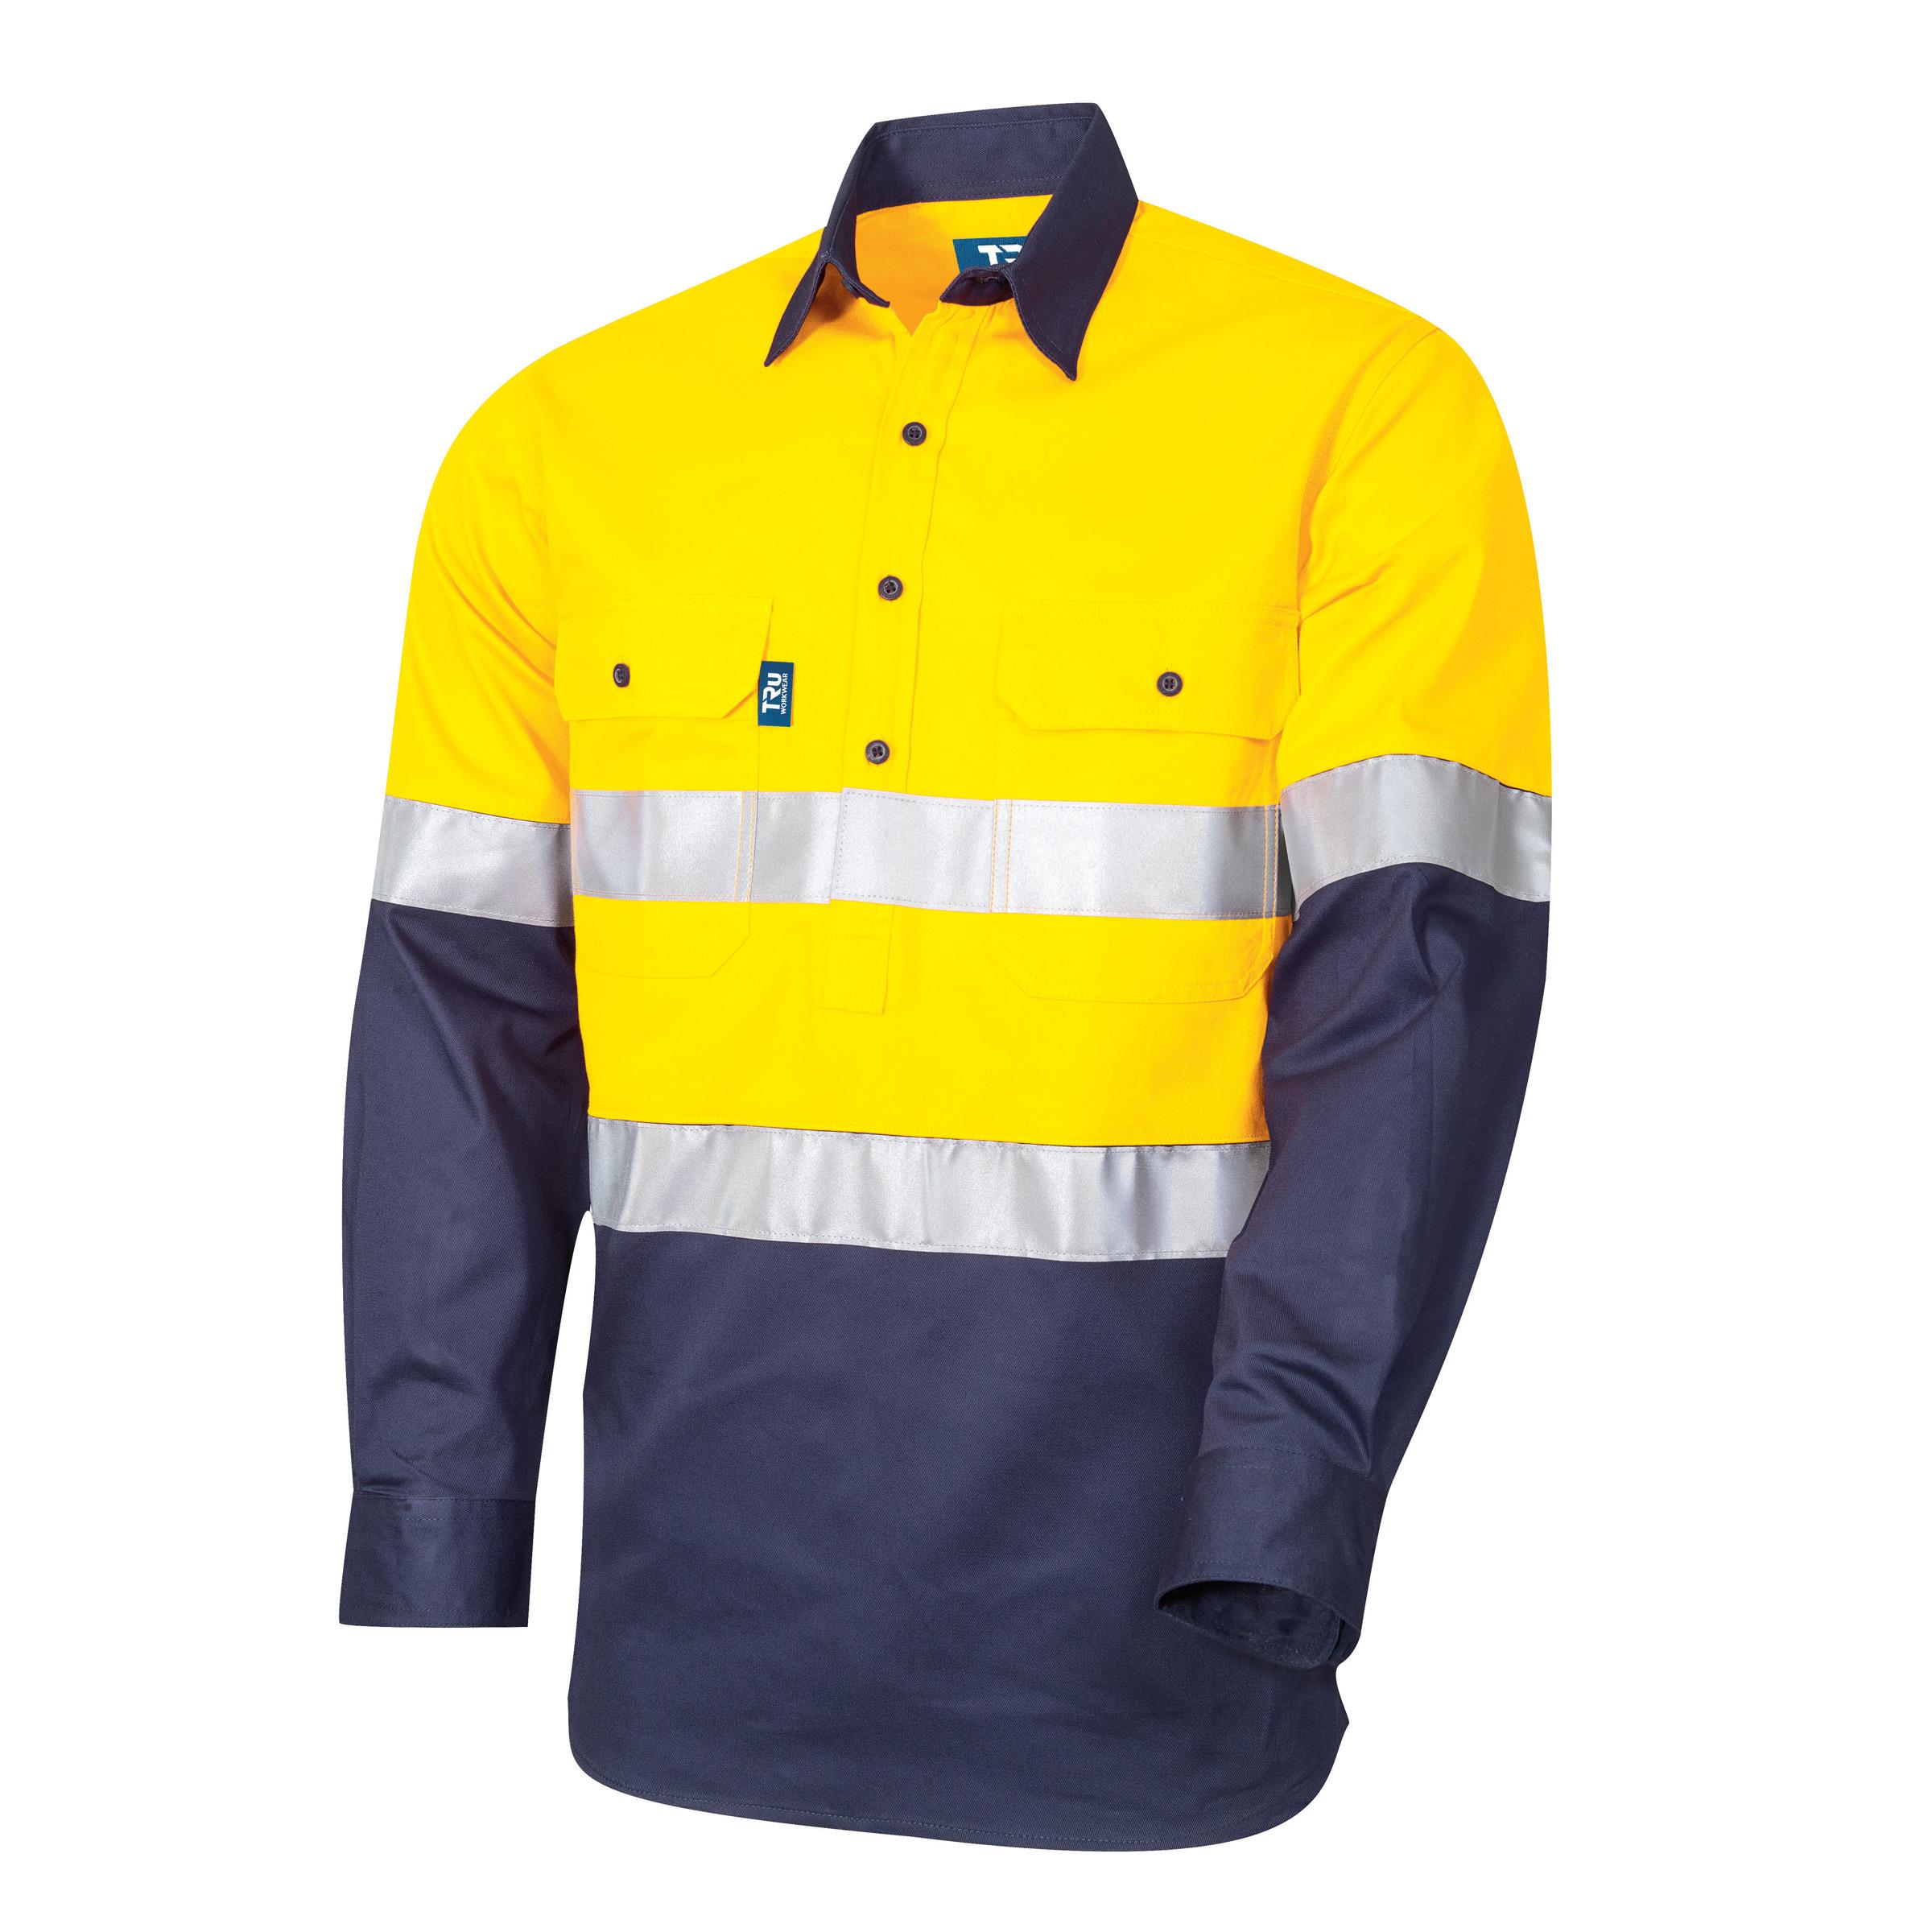 Tru Workwear Lightweight Vented LS Closed Front Hi-Vis Drill Shirt With Reflective Tape-Tru Workwear